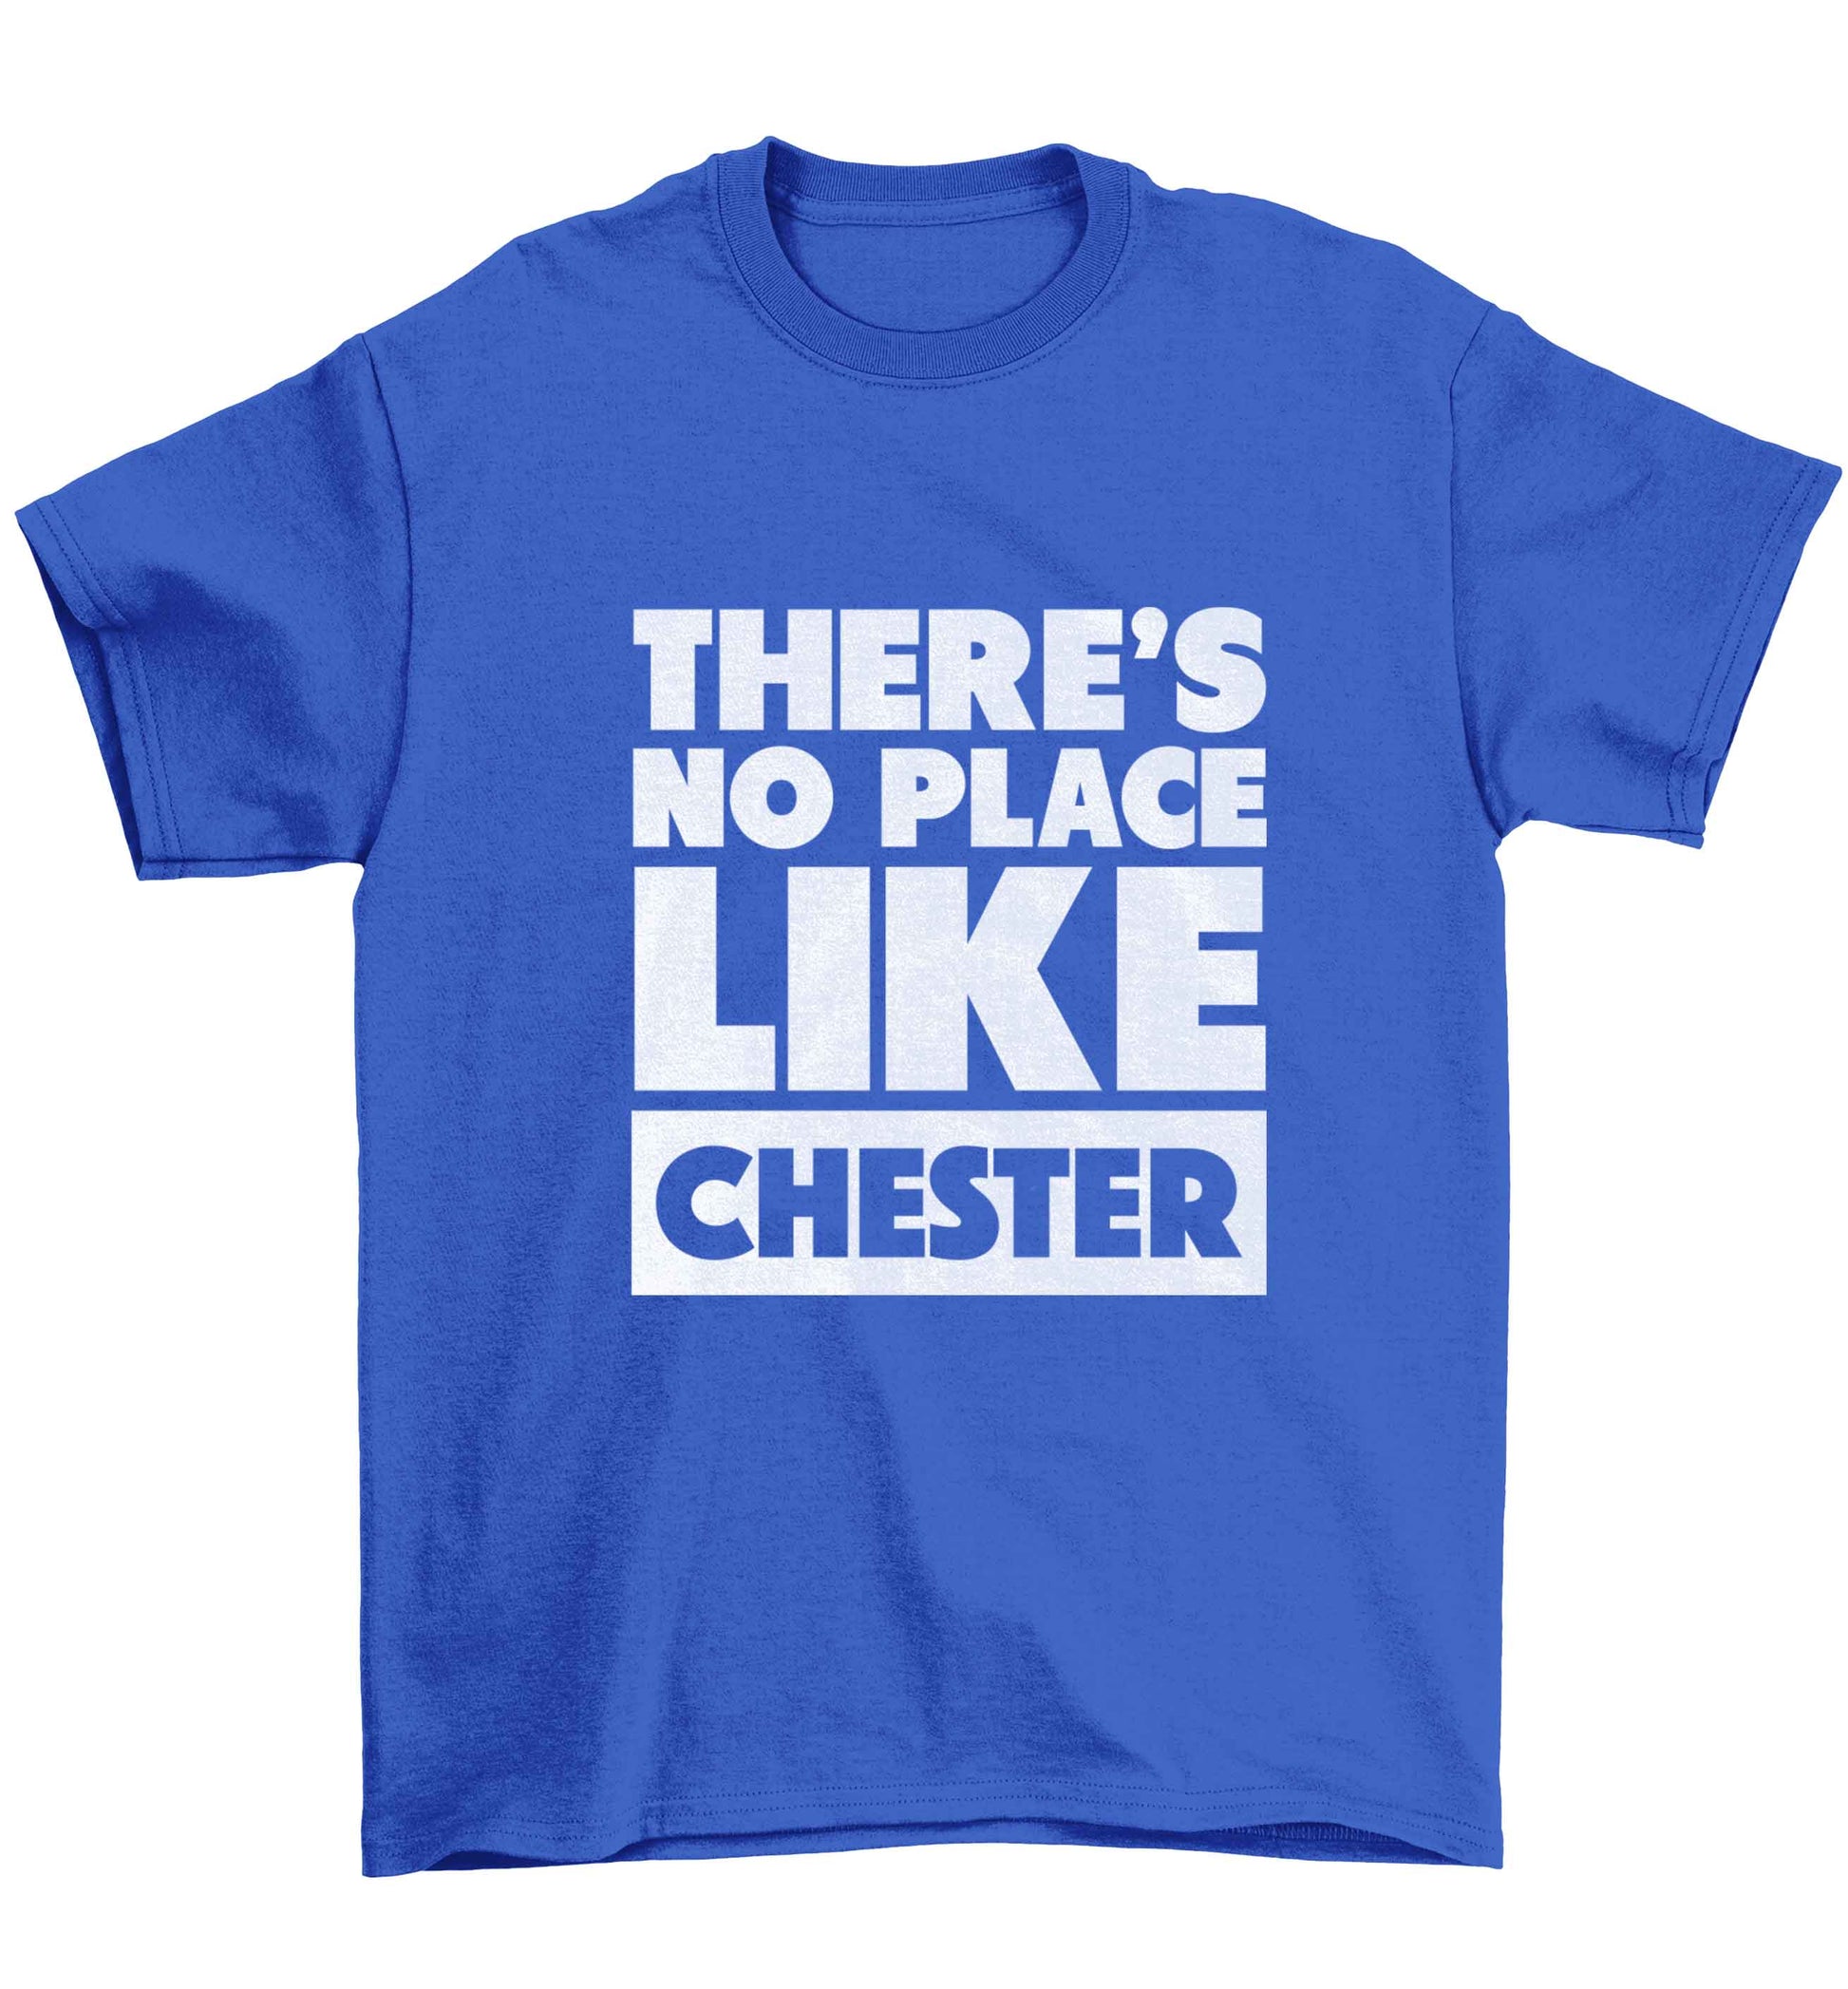 There's no place like Chester Children's blue Tshirt 12-13 Years